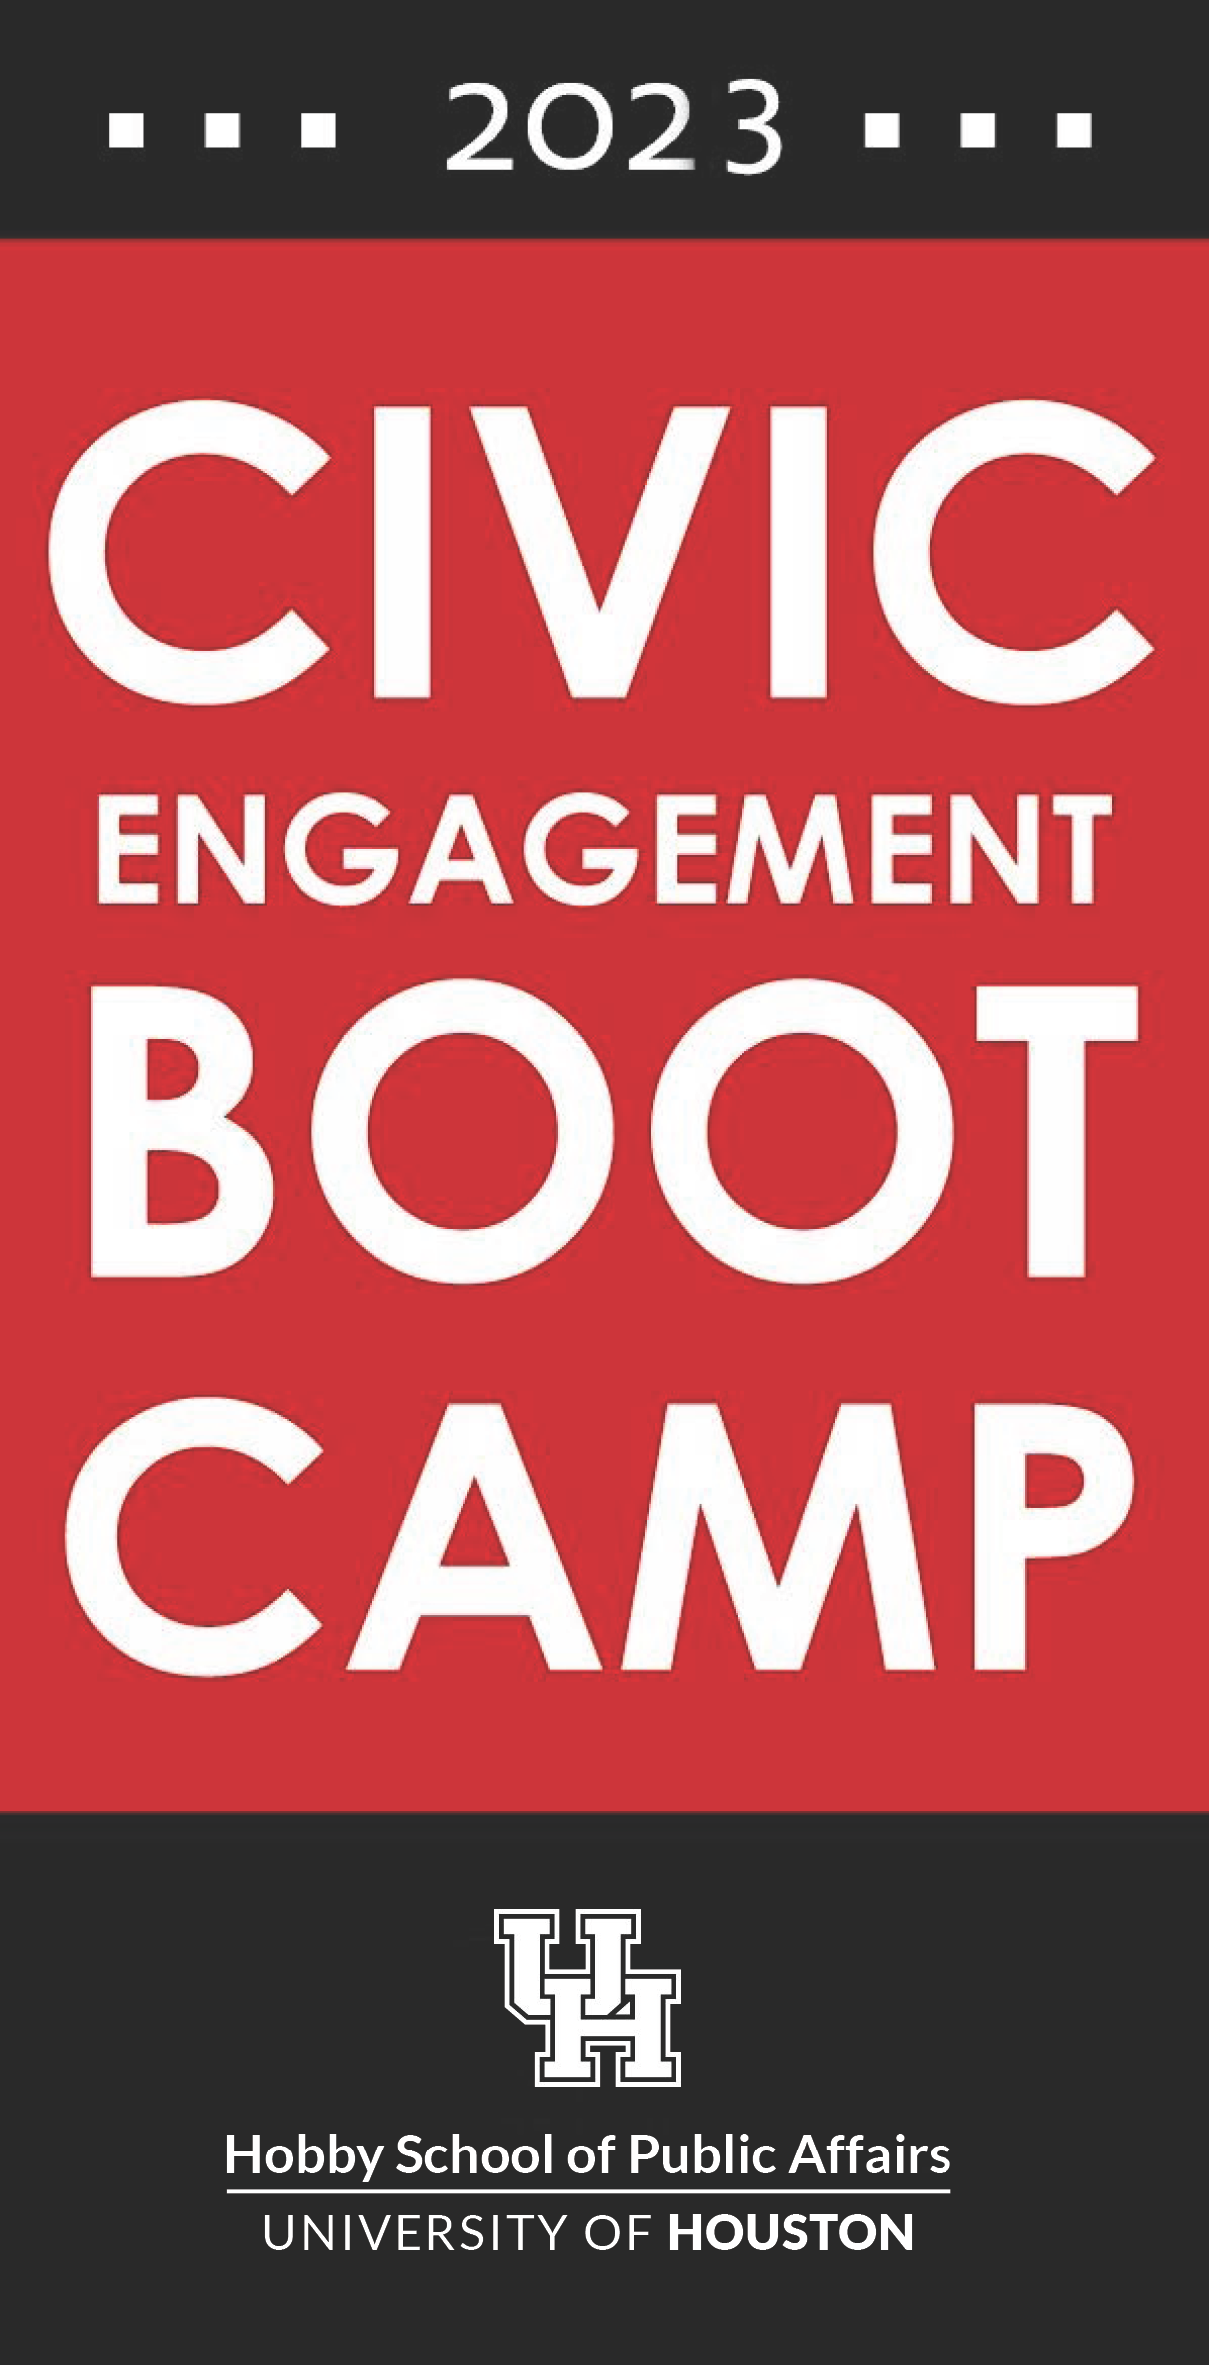 2023 Civic Engagement Boot Camp graphic